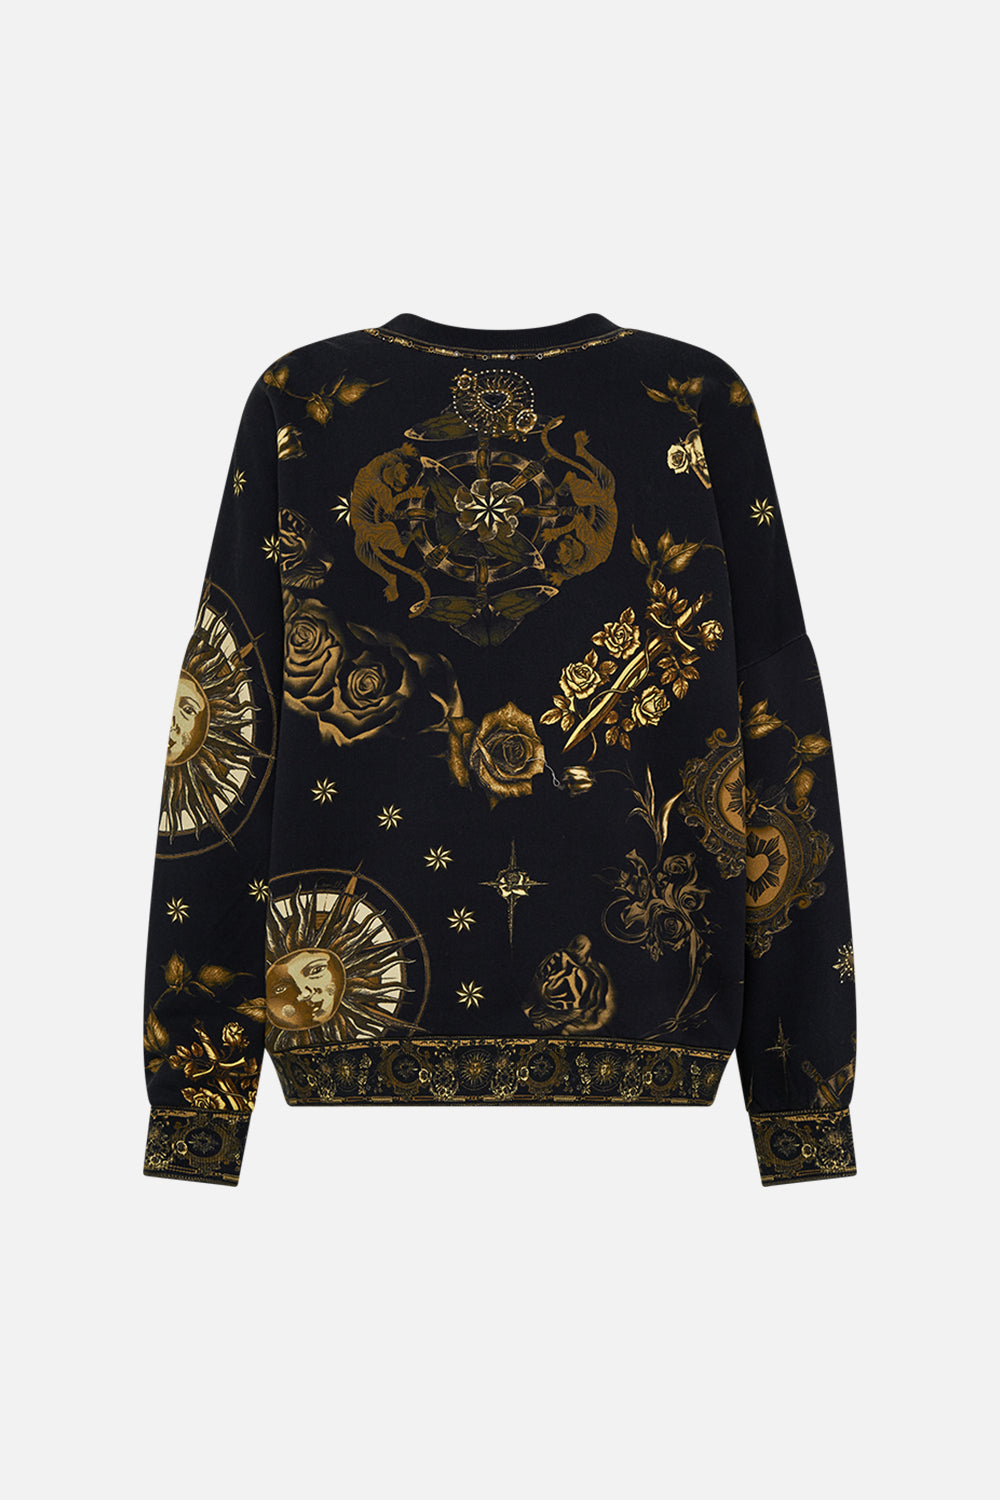 CAMILLA black dropped shoulder sweat shirt in So Says The Oracle print.